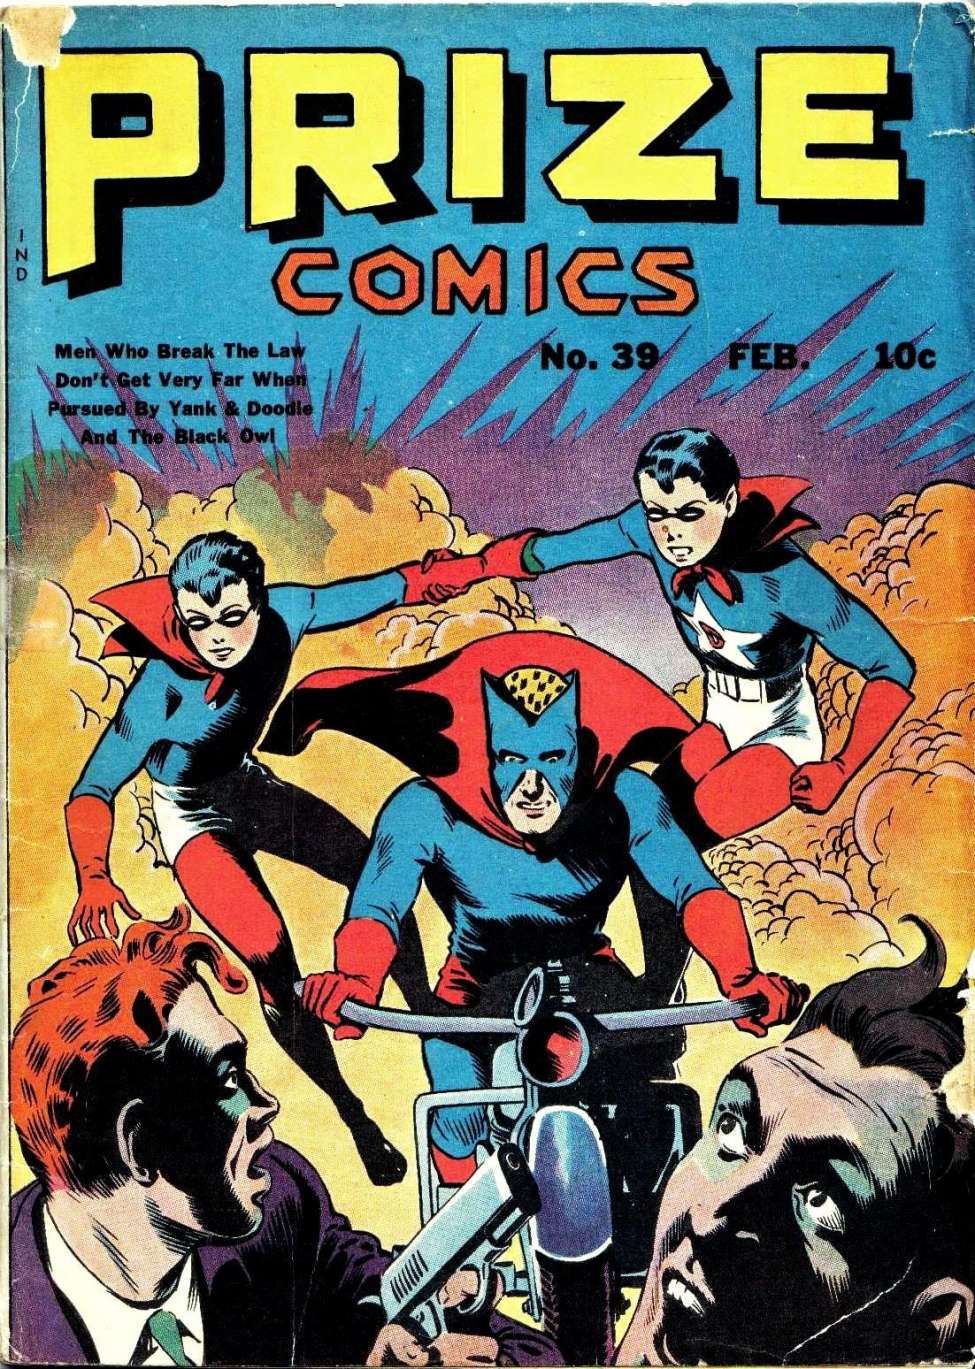 Book Cover For Prize Comics 39